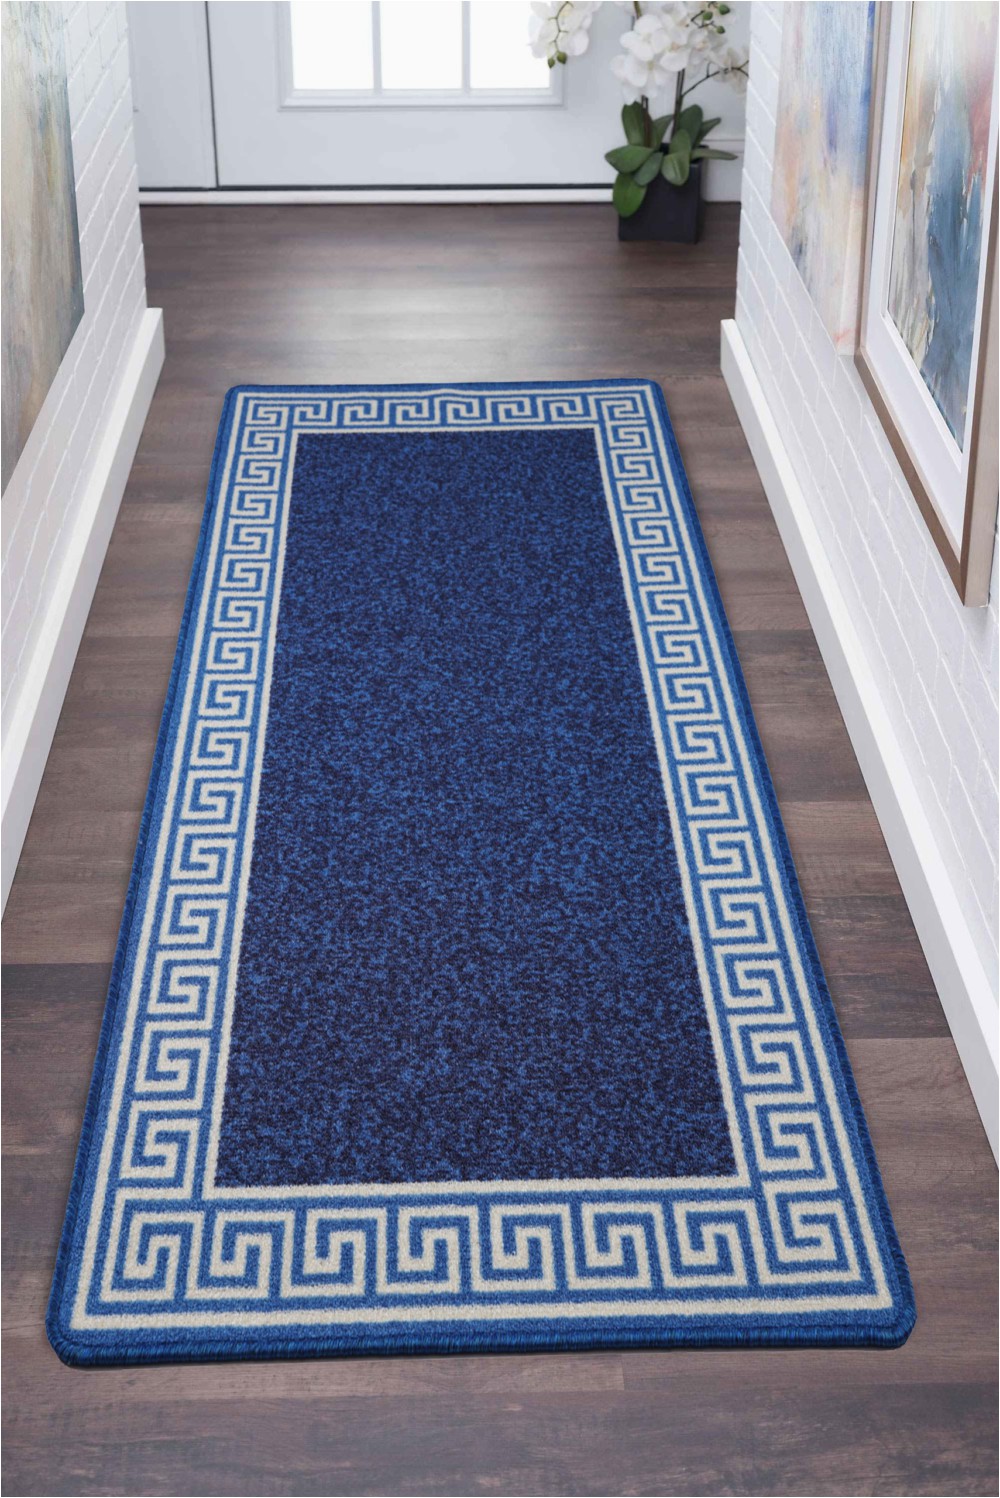 Extra Large Blue Rugs Extra Non Slip Greeky Blue & Cream Rugs Bedroom Carpets Uk